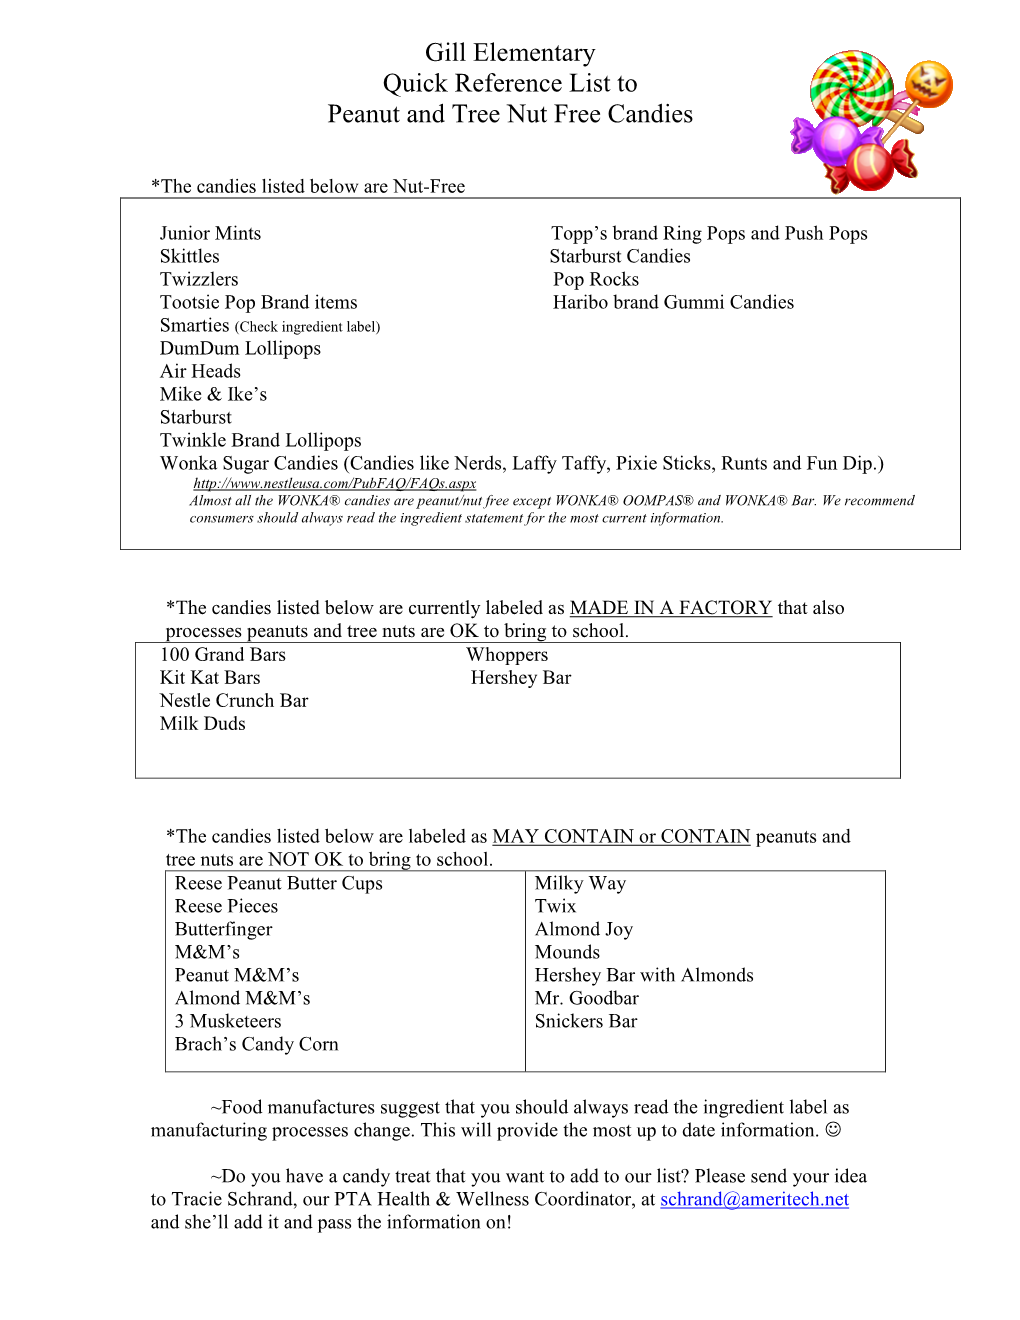 Gill Elementary Quick Reference List to Peanut and Tree Nut Free Candies